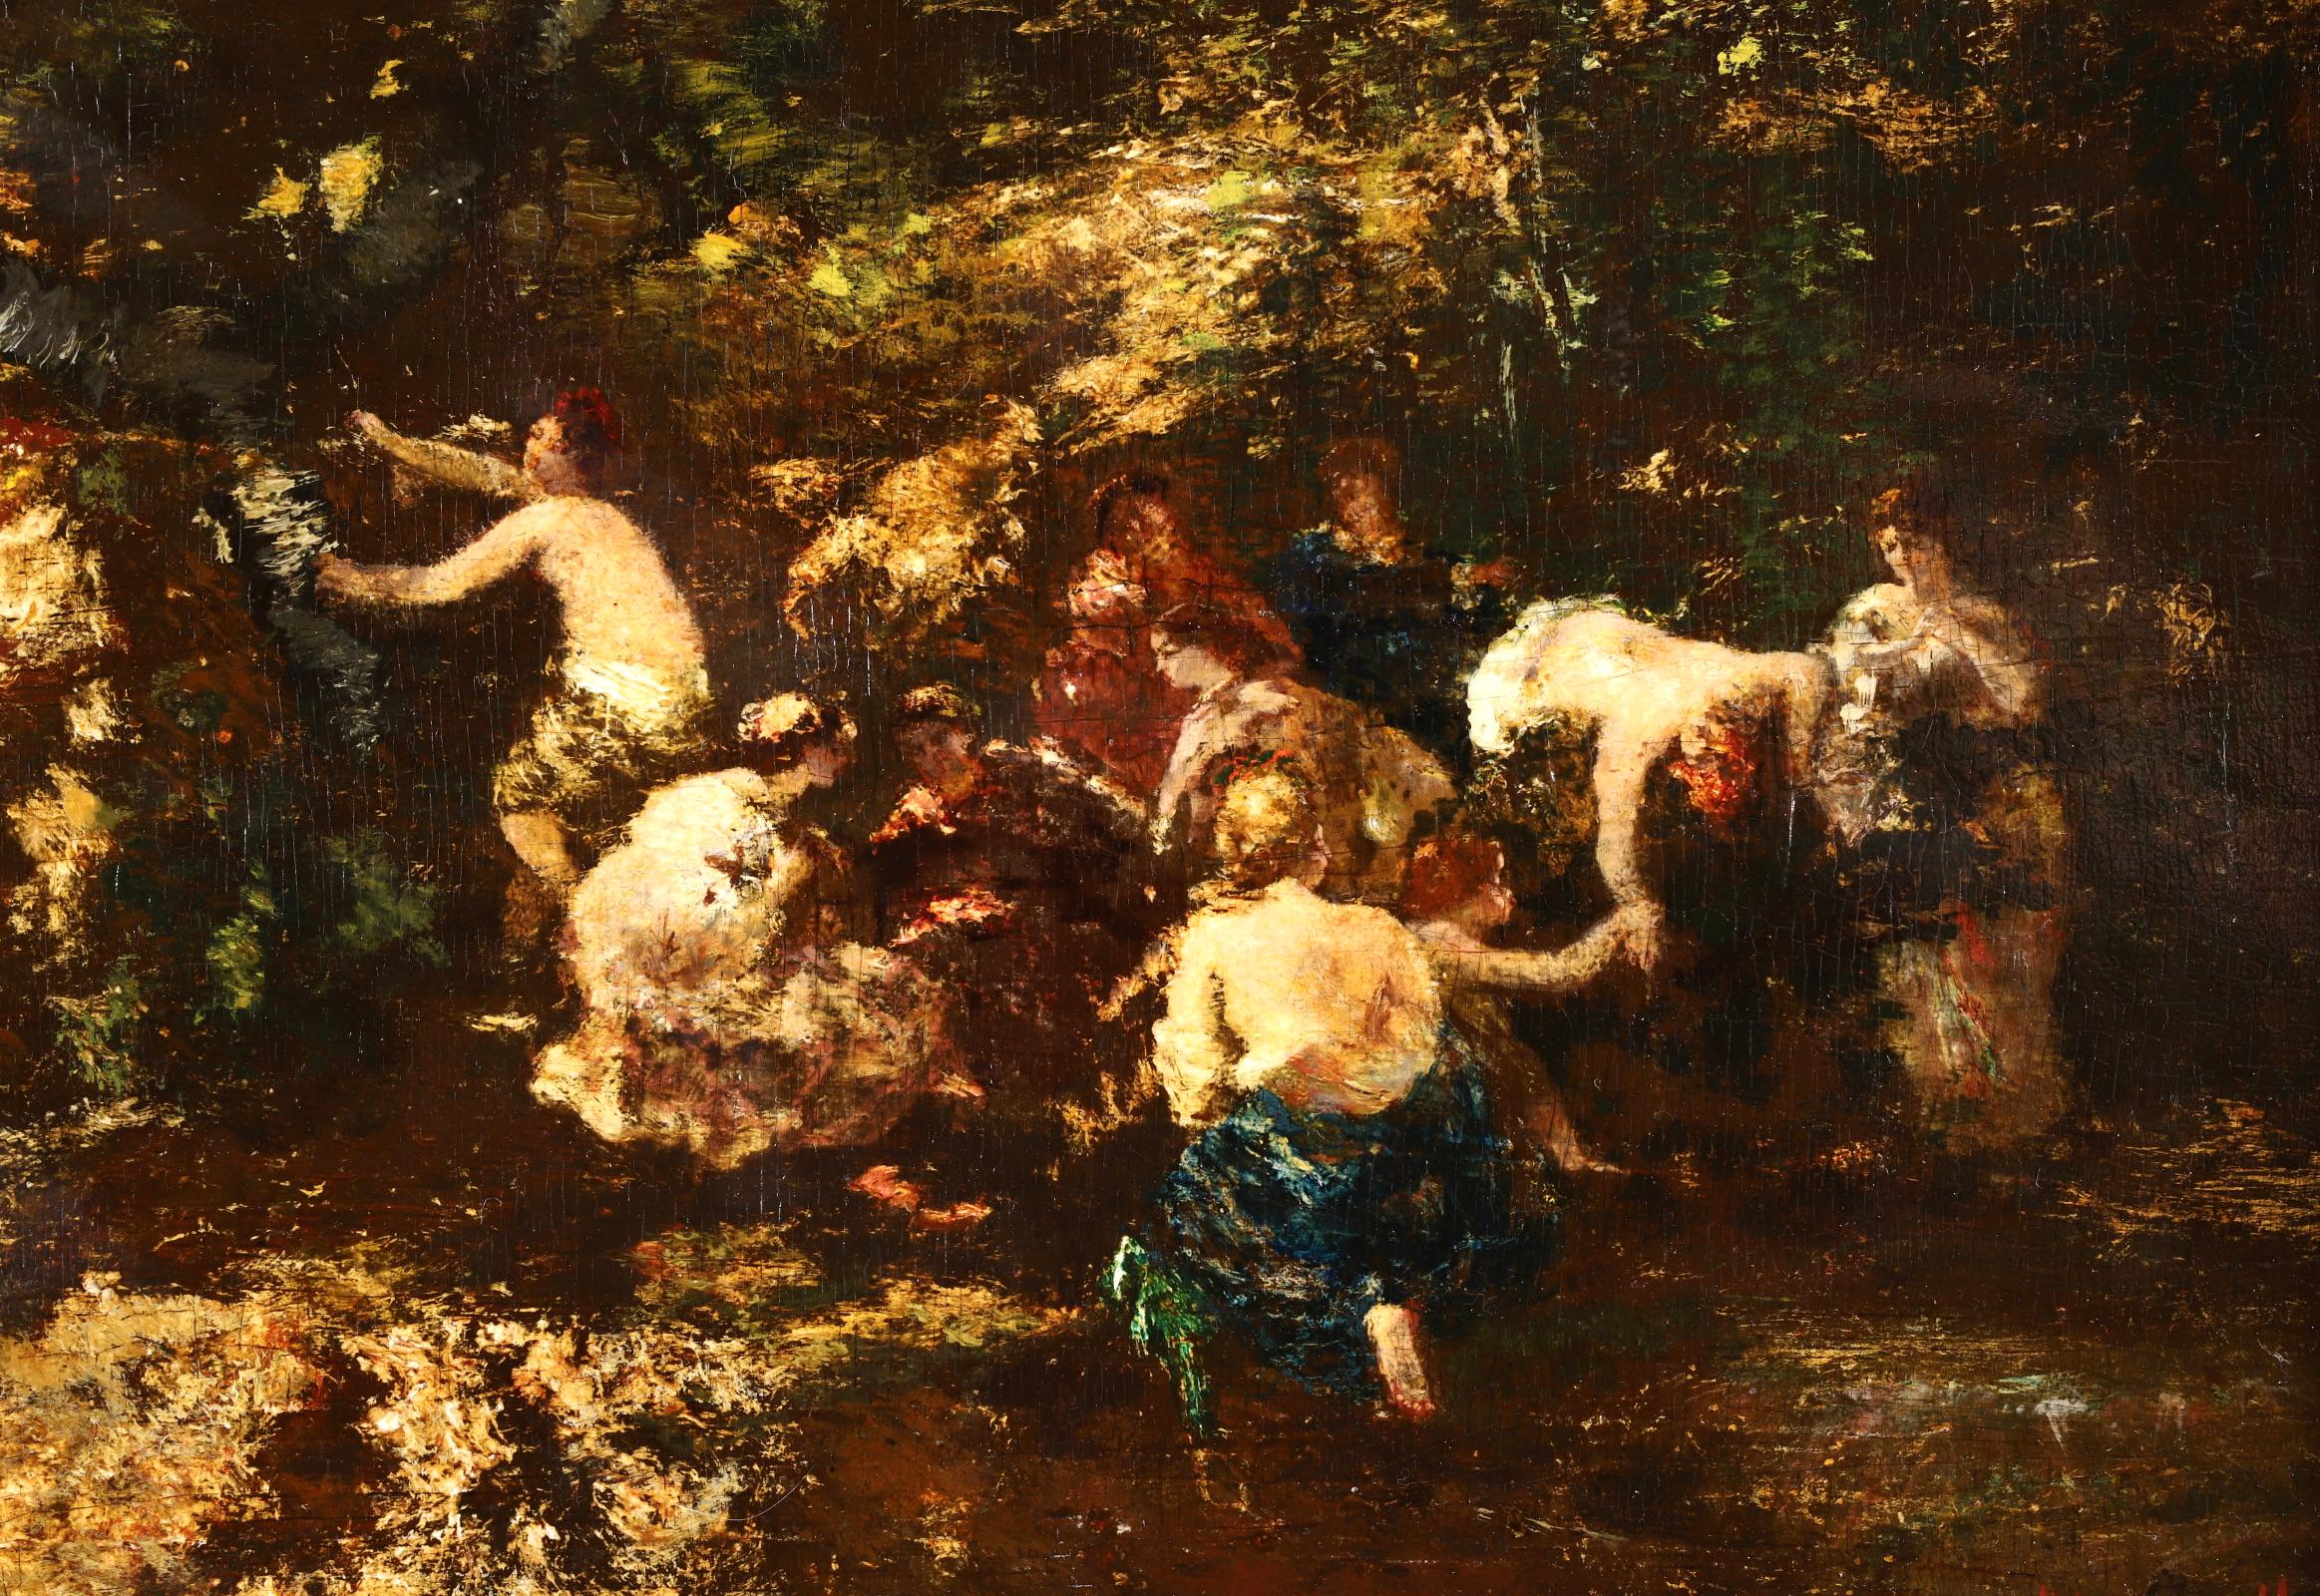 Signed figures in a landscape oil on panel circa 1876 by French painter Adolphe Joseph Thomas Monticelli. The work depicts depicting bathers in a river. 

Signature:
Signed lower right

Dimensions:
Framed: 14